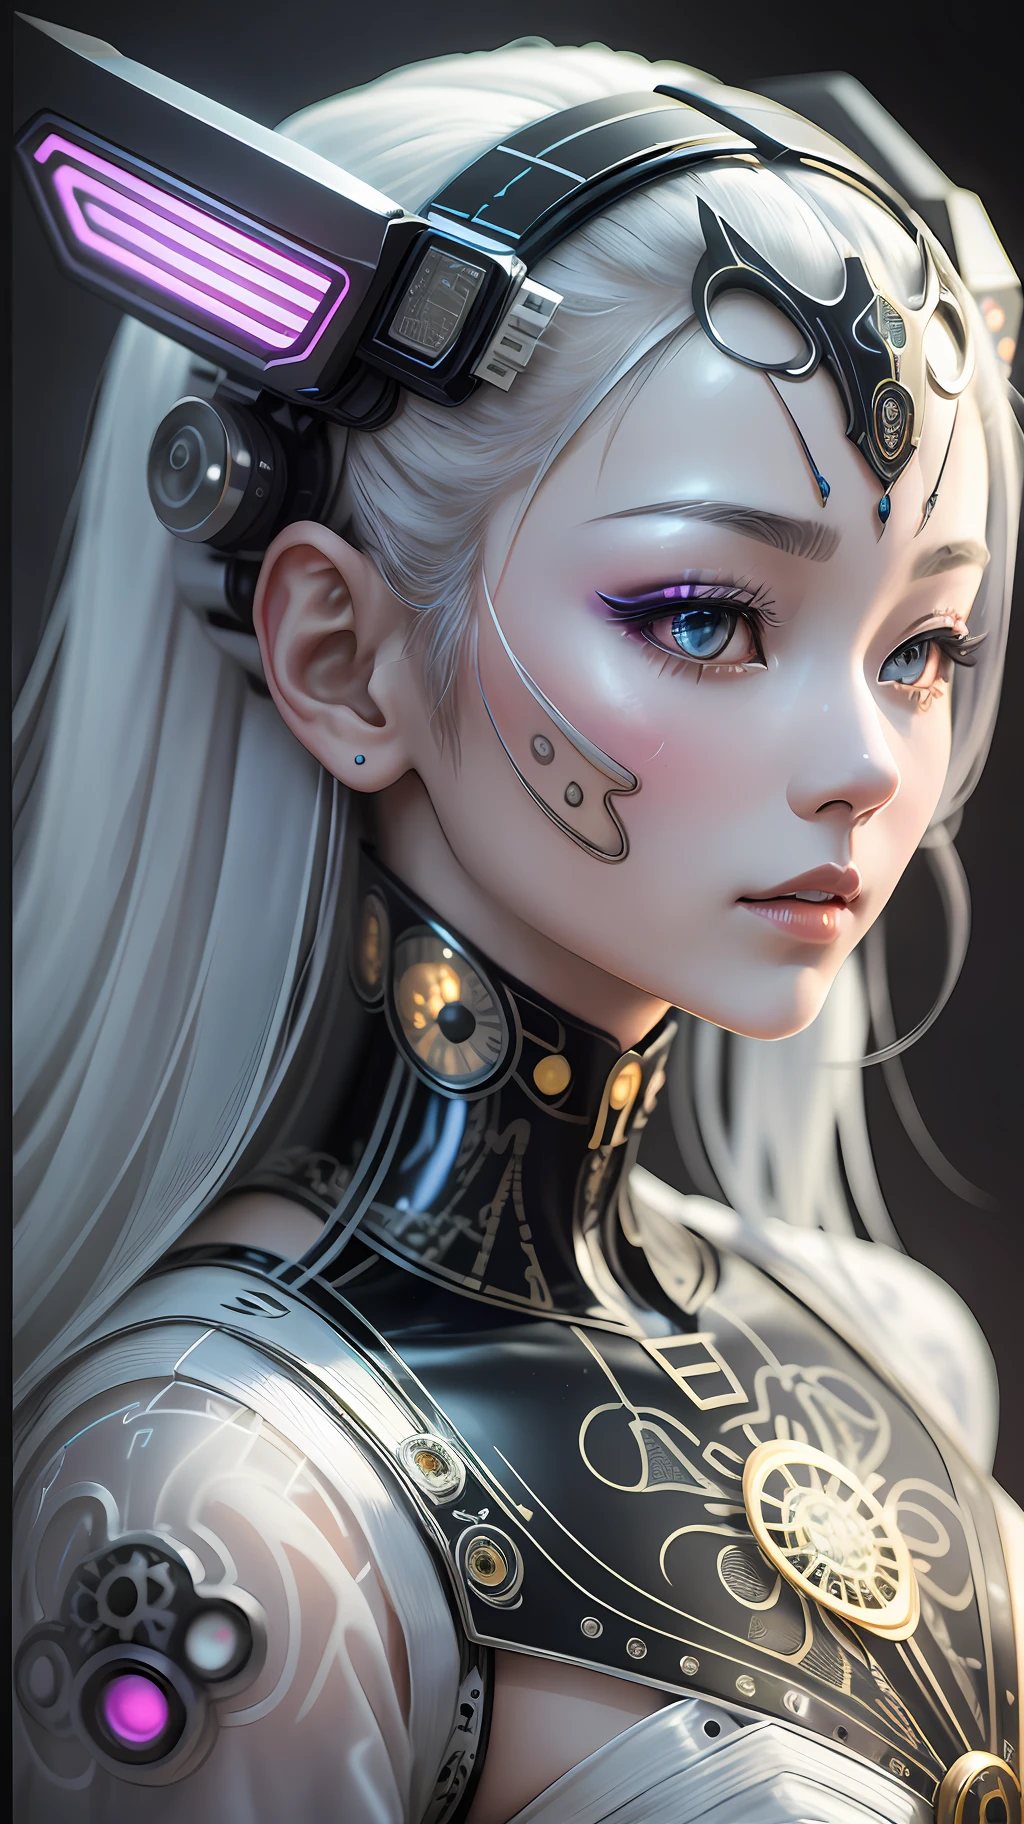 A portrait photograph of mid-twenties Japanese female robot made of shiny white and silver transparent glass and plastic, geisha makeup and hairstyle, silver metal internal body mechanisms, dynamic pose, flowing organic construction, detailed engraving, lacework designs, glowing golden circuitry, colorful neon trim, detailed engraving, lacework designs, glowing circuitry, neon trim, art by H.R. Giger, Greg Rutowski